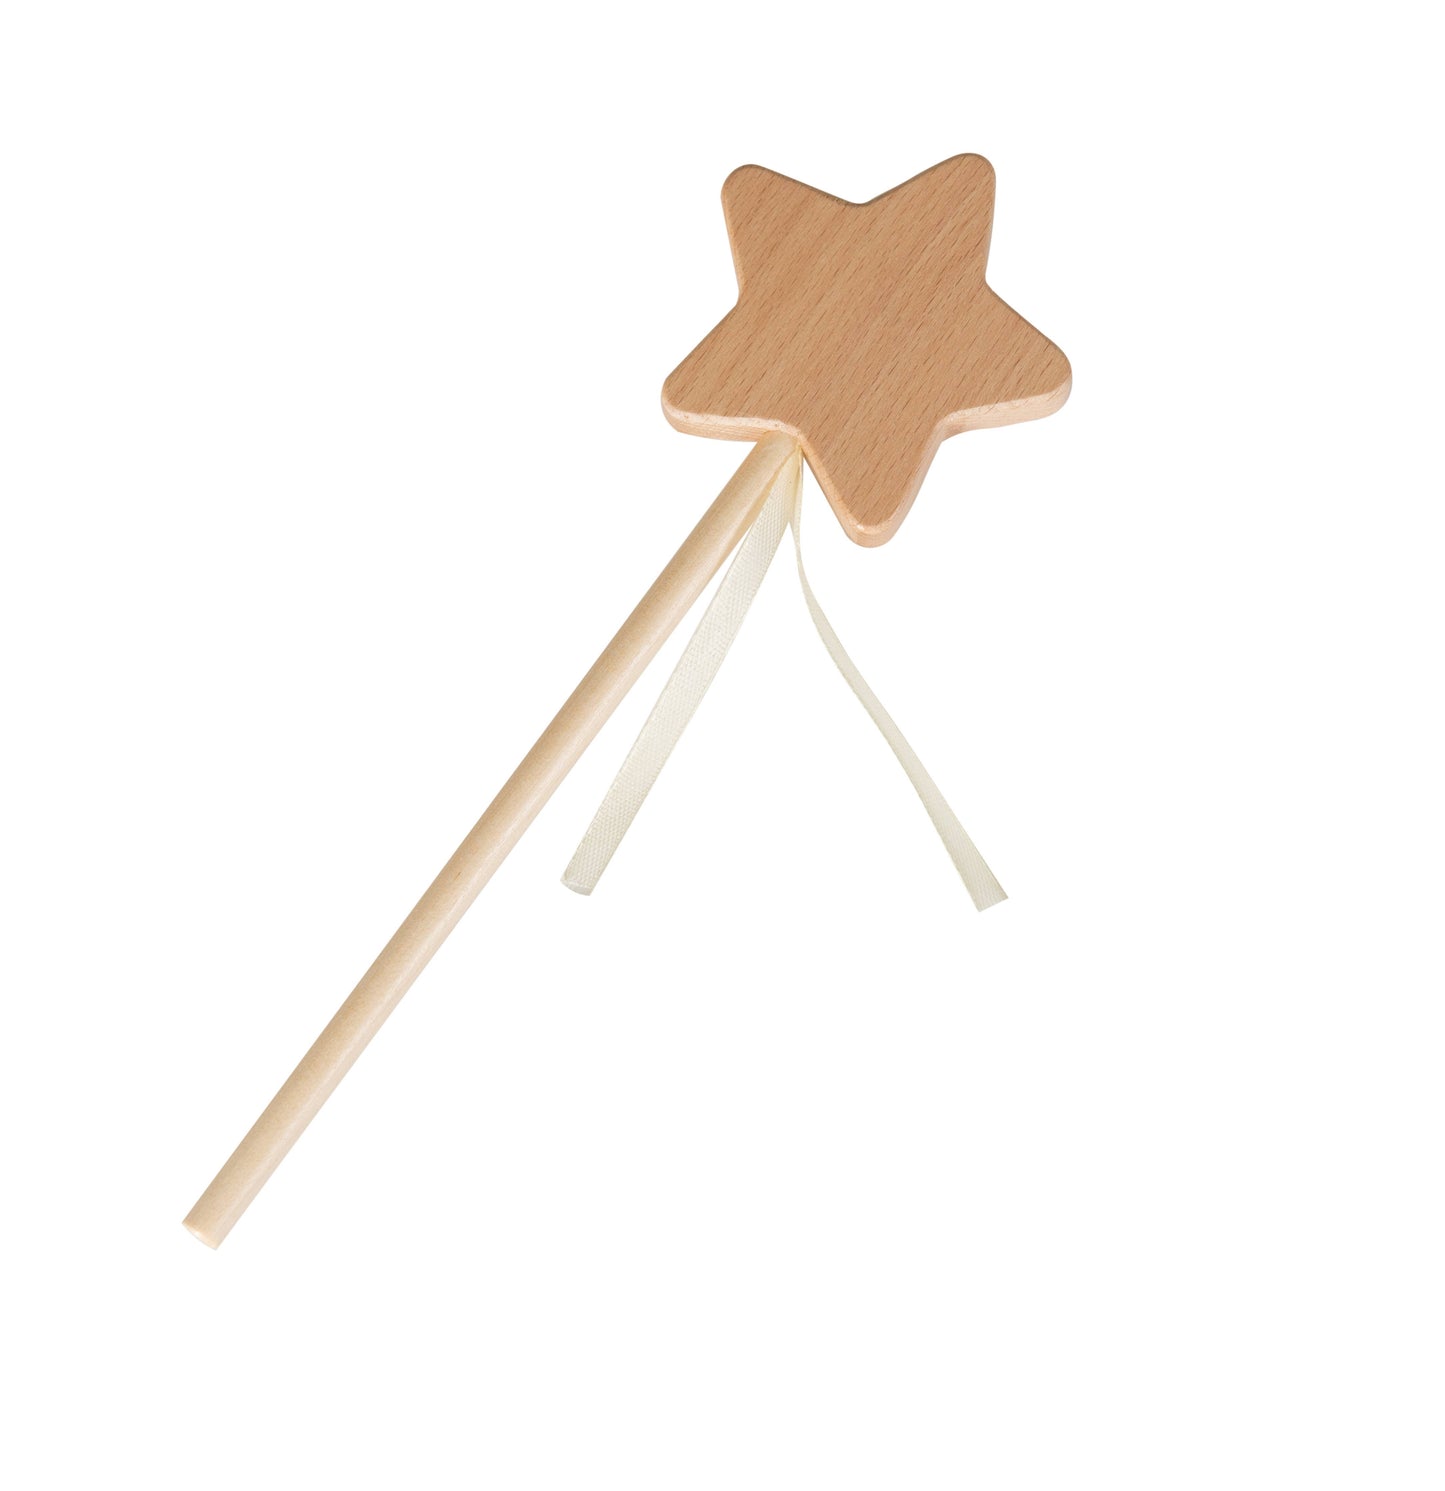 Wooden Toy Magic Wand